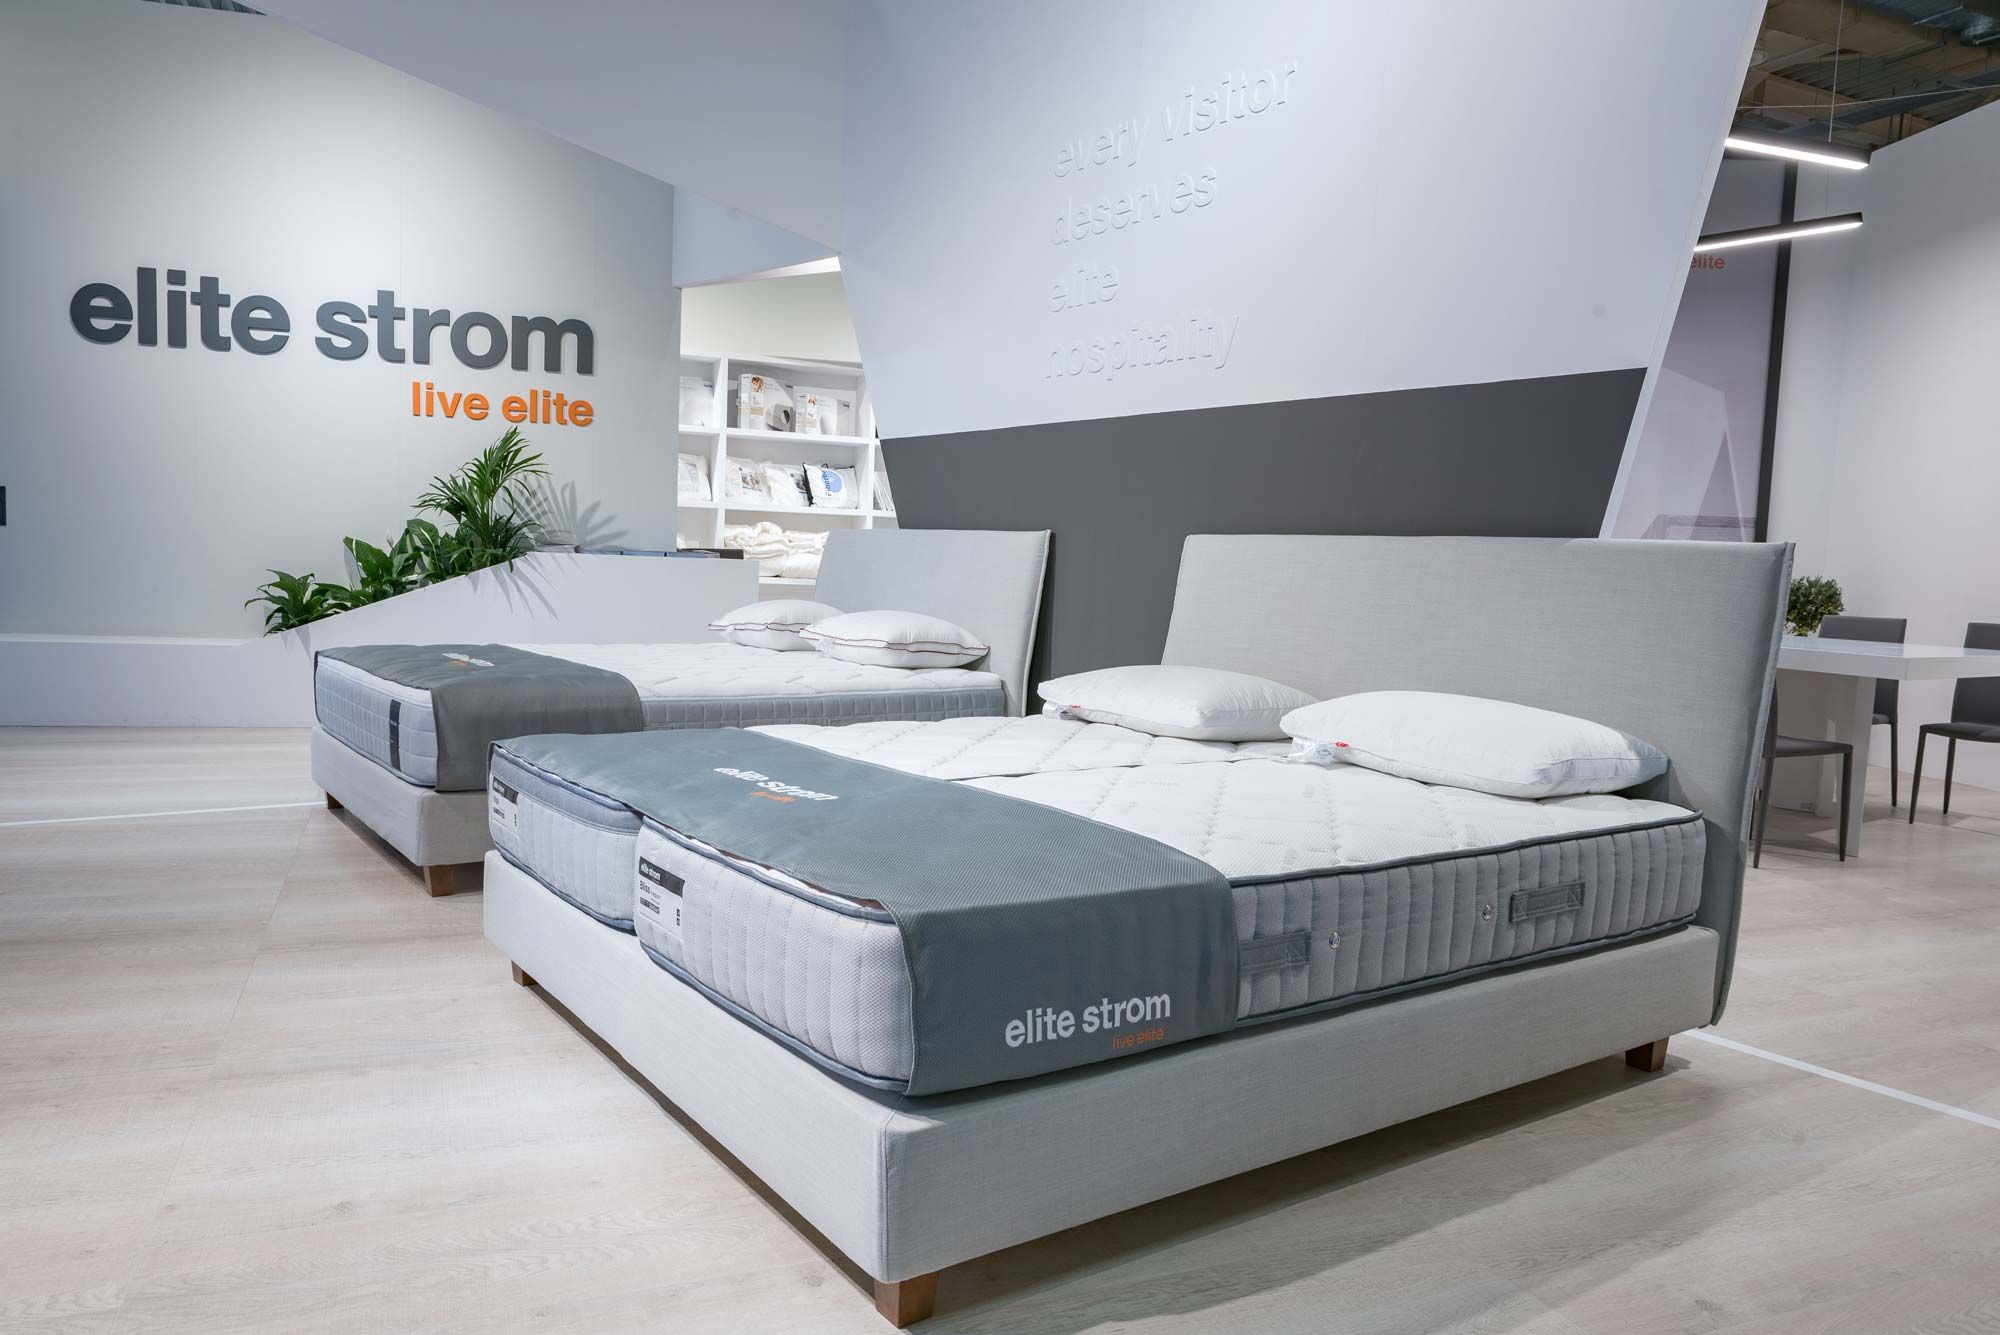 Elite strom was once again present this year at the International Exhibition HORECA 2020, at the Metropolitan Expo. Our participation was completed with great success and we are very happy for that. We would like to thank all those who visited our stand and discussed the needs and the future of their business through the complete sleep proposals of elite strom, TEMPUR and Sealy. We renew our appointment for 2021 with even more suggestions and surprises for your business.